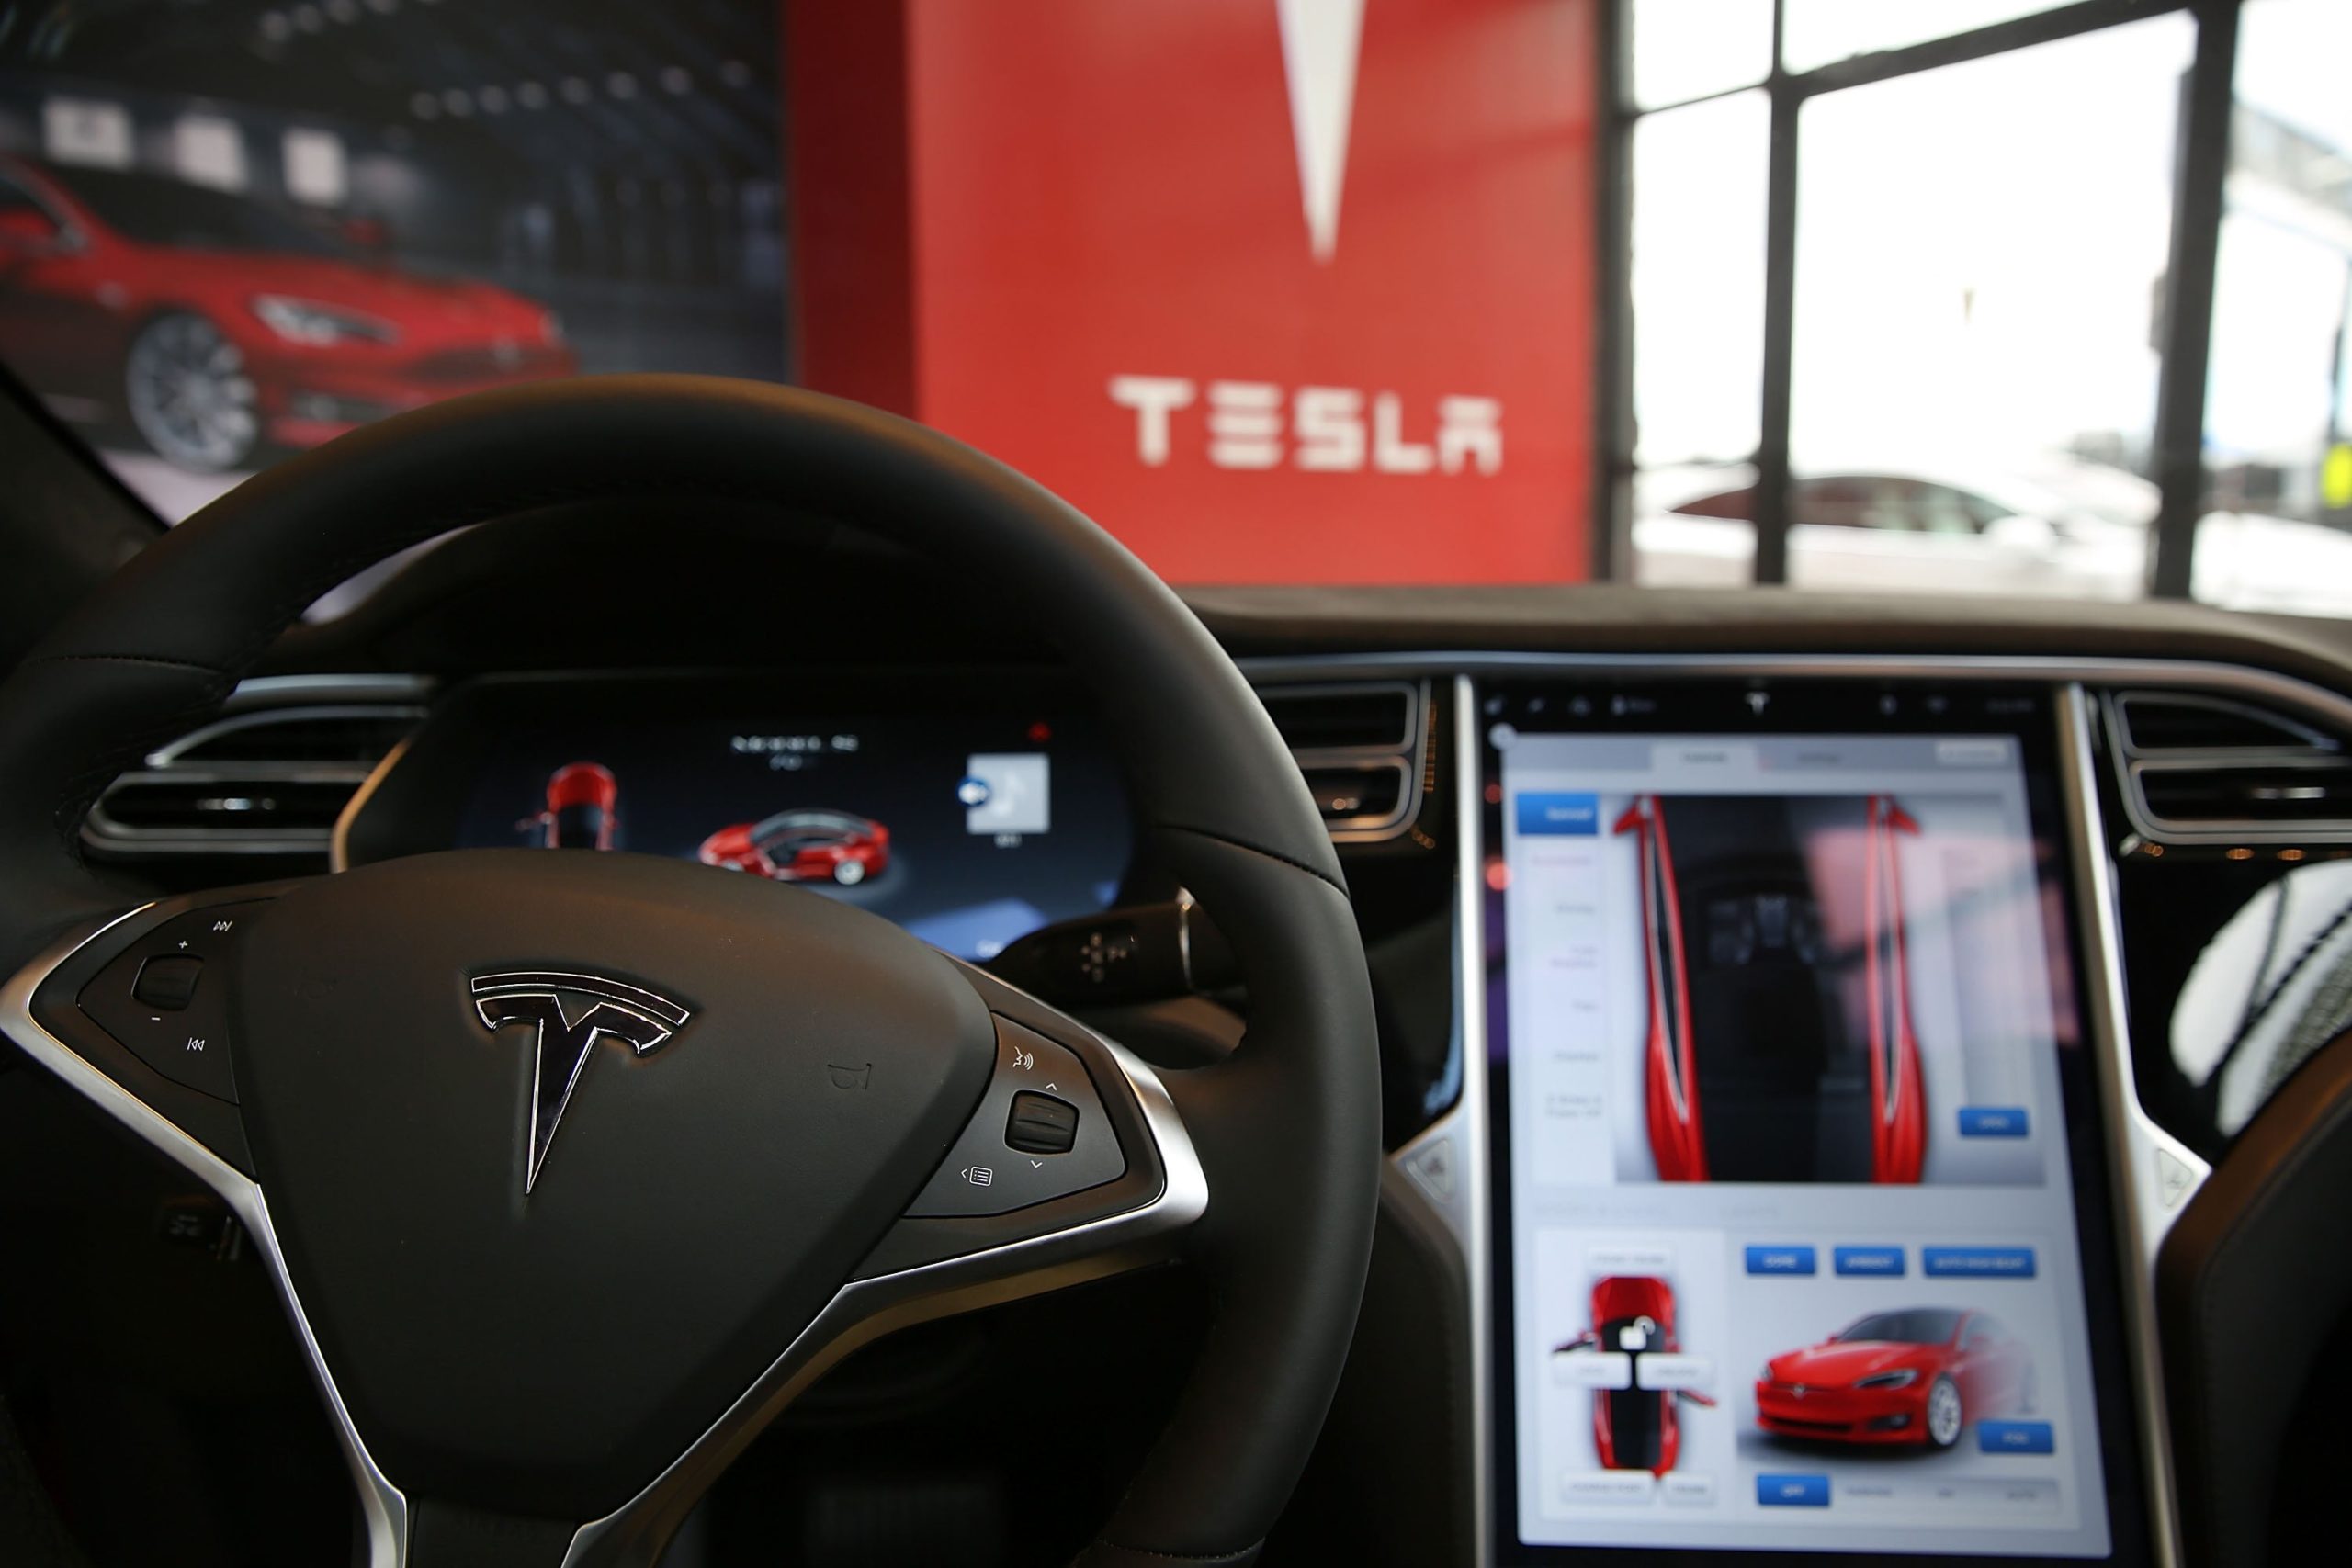 Germany Is The Latest Country Investigating The Safety Of Tesla’s Autopilot